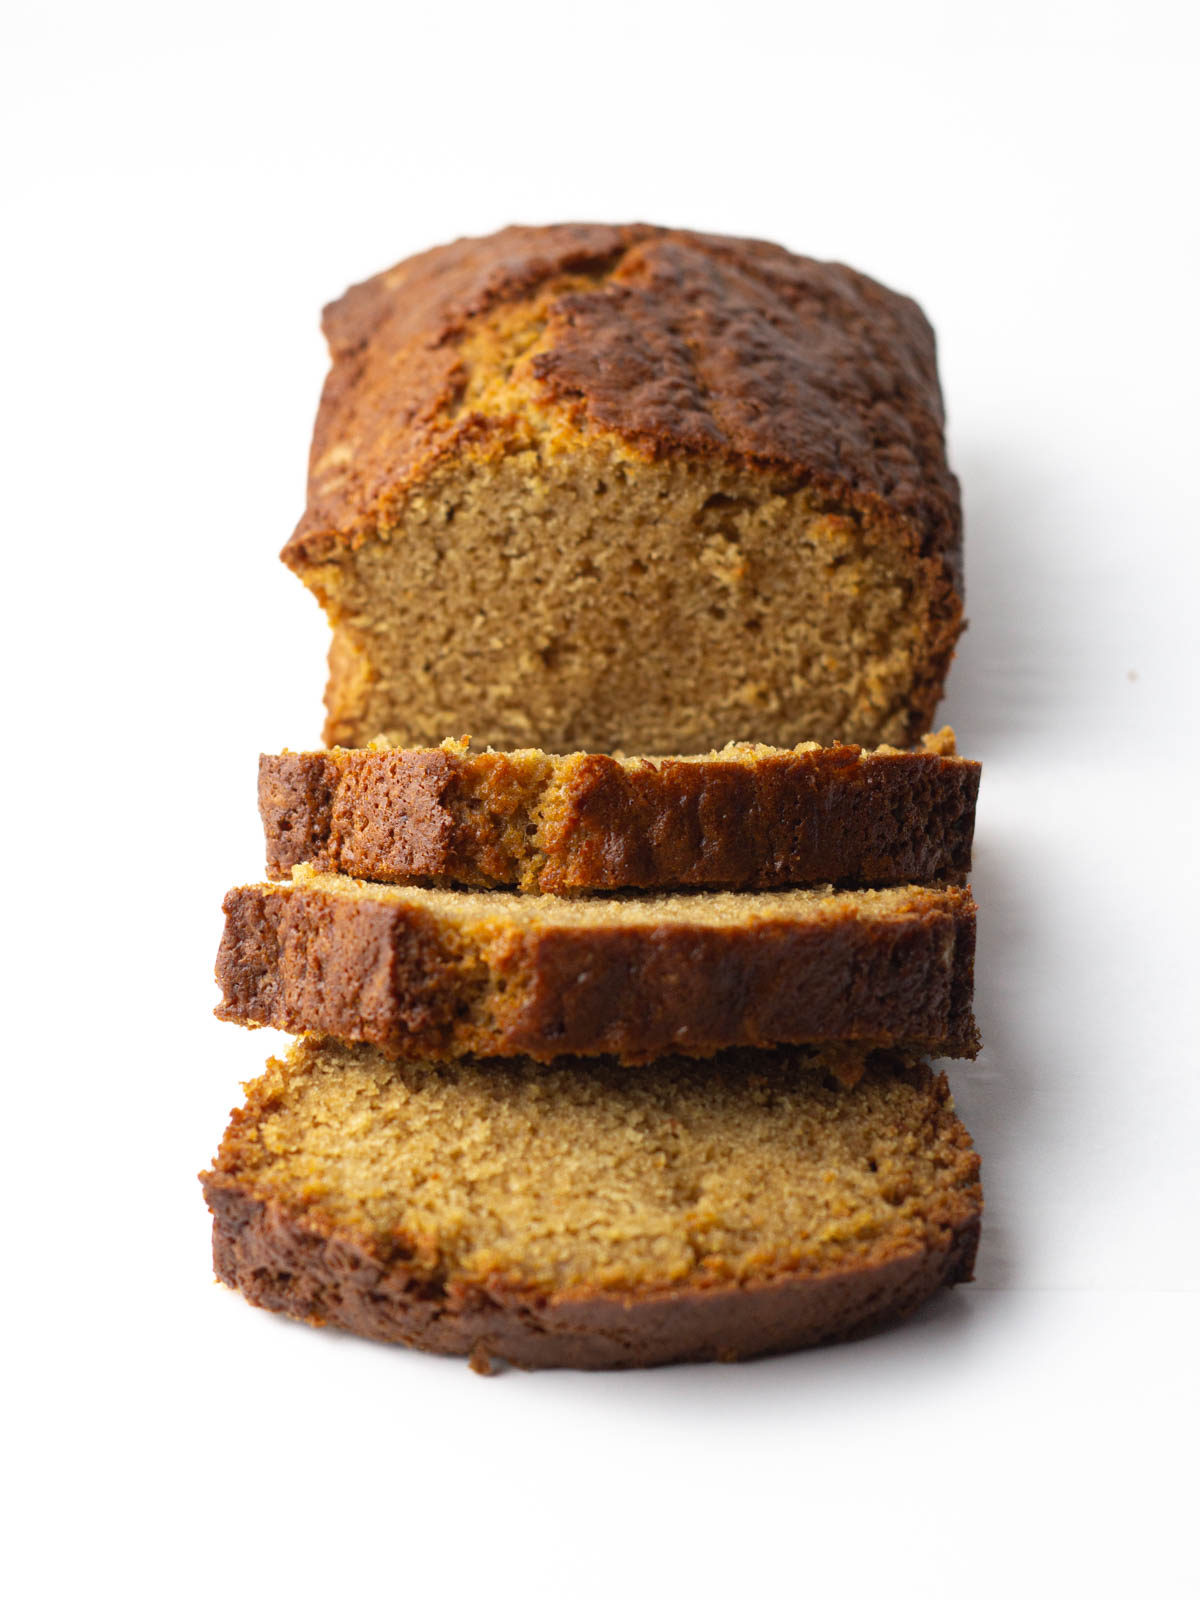 An angled view of a loaf of chai bread with three slices cut and leaning away from the rest of the loaf.